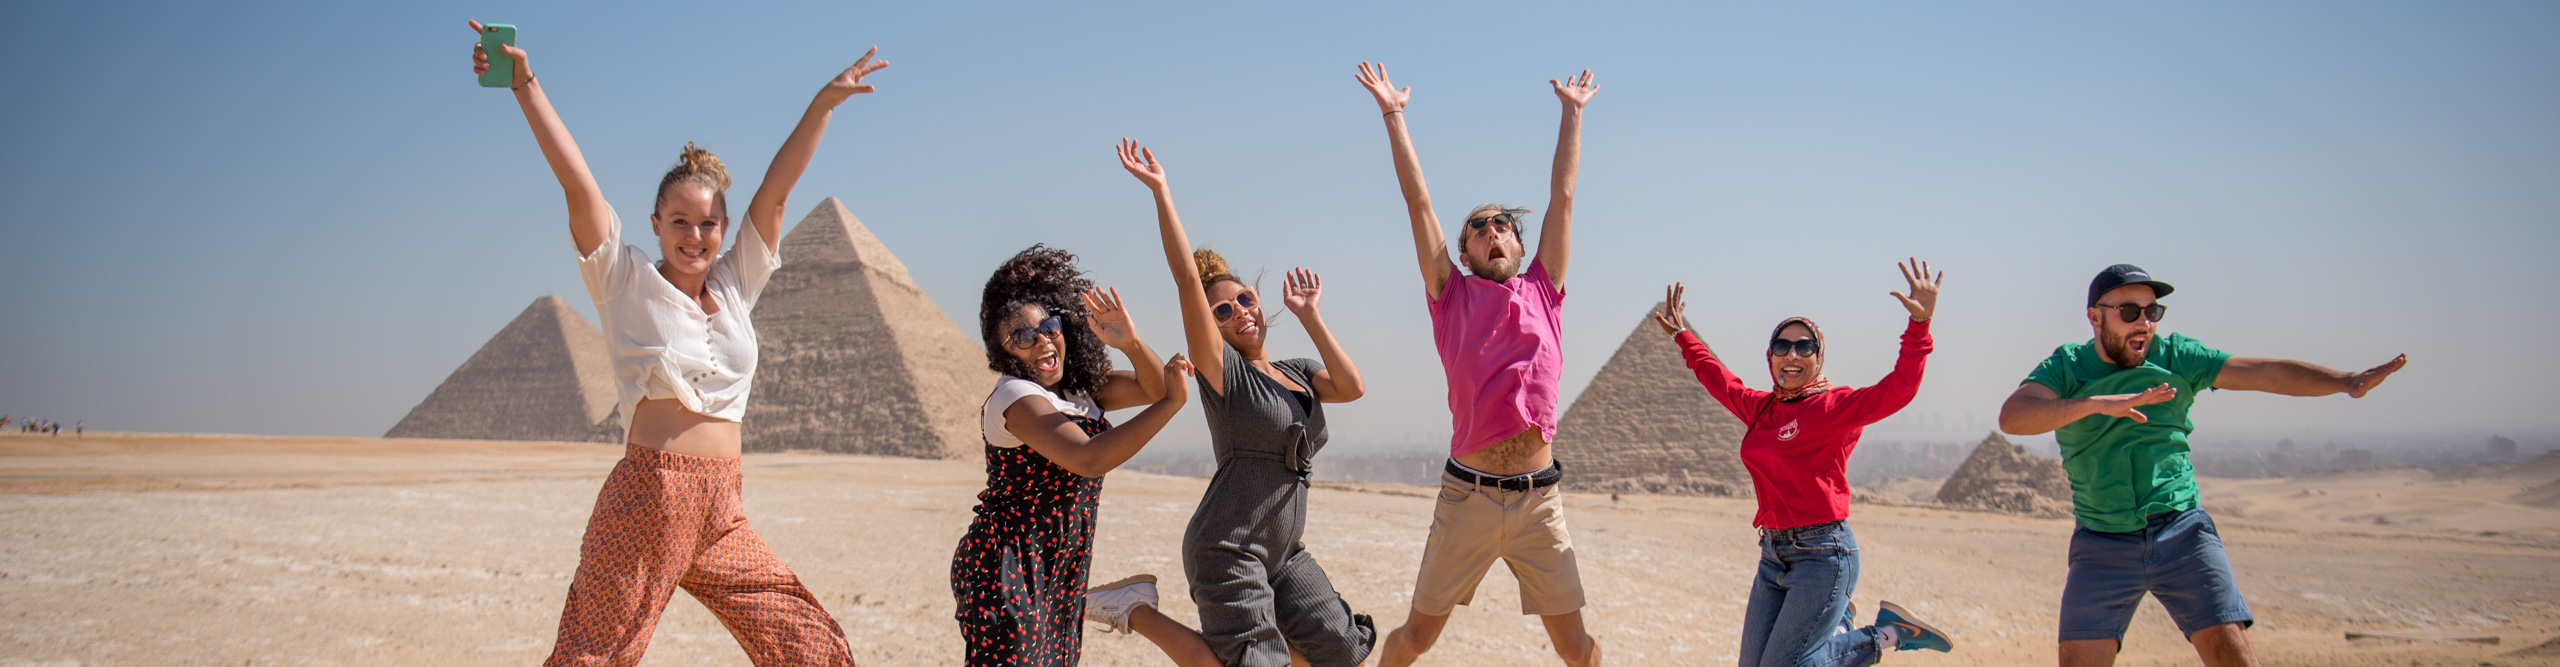 Group leaping in the air in front of pyramids with hands in the air on a clear sunny day, Egypt